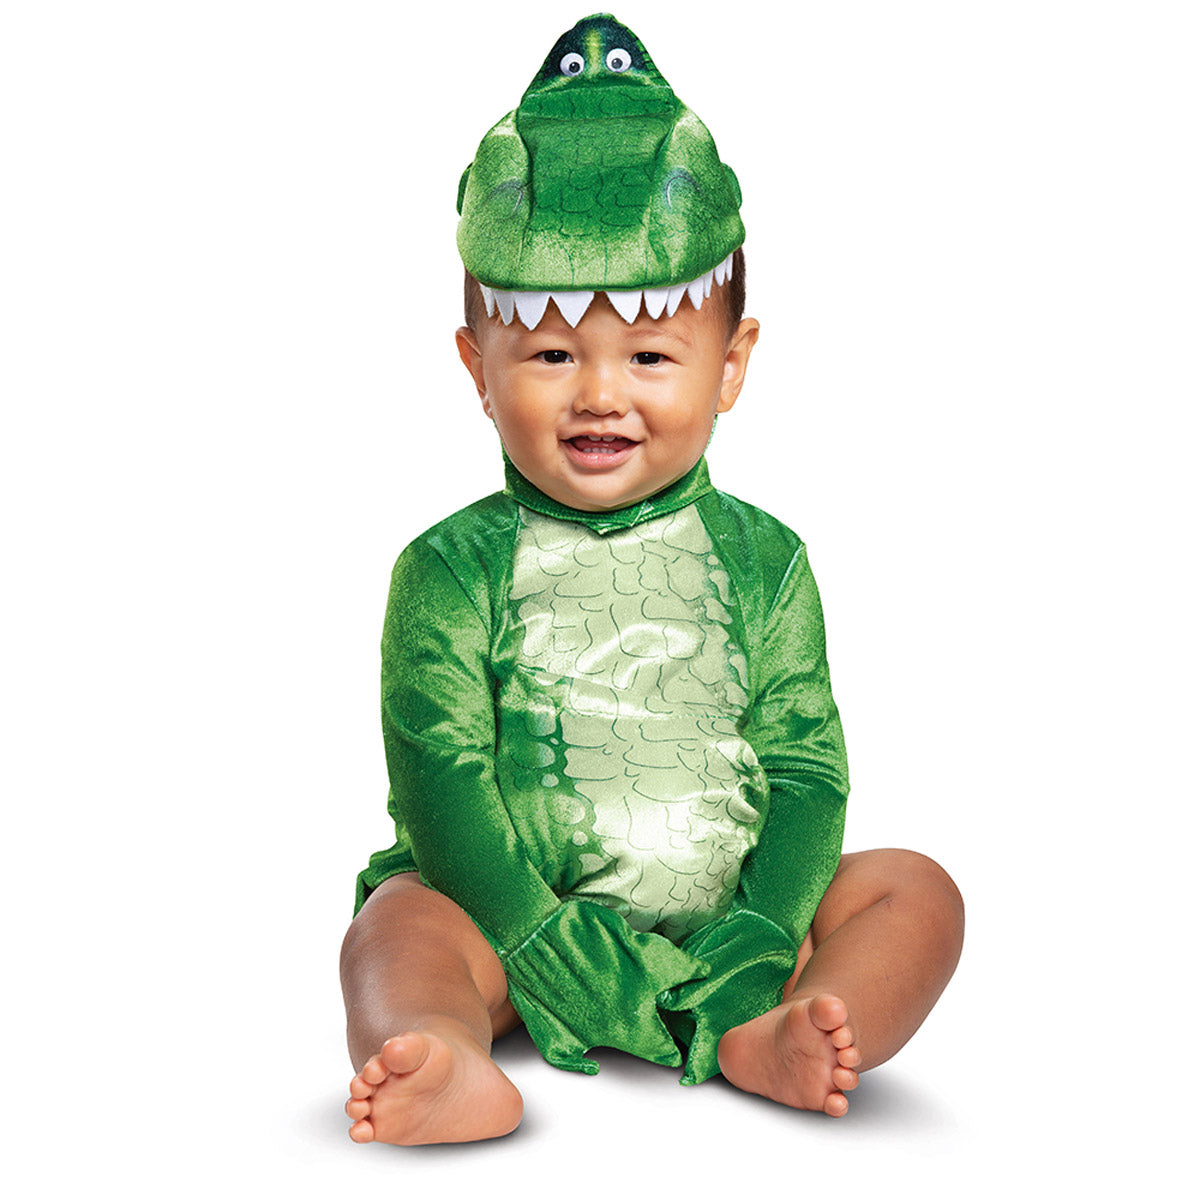 REX INFANT Disguise 14004